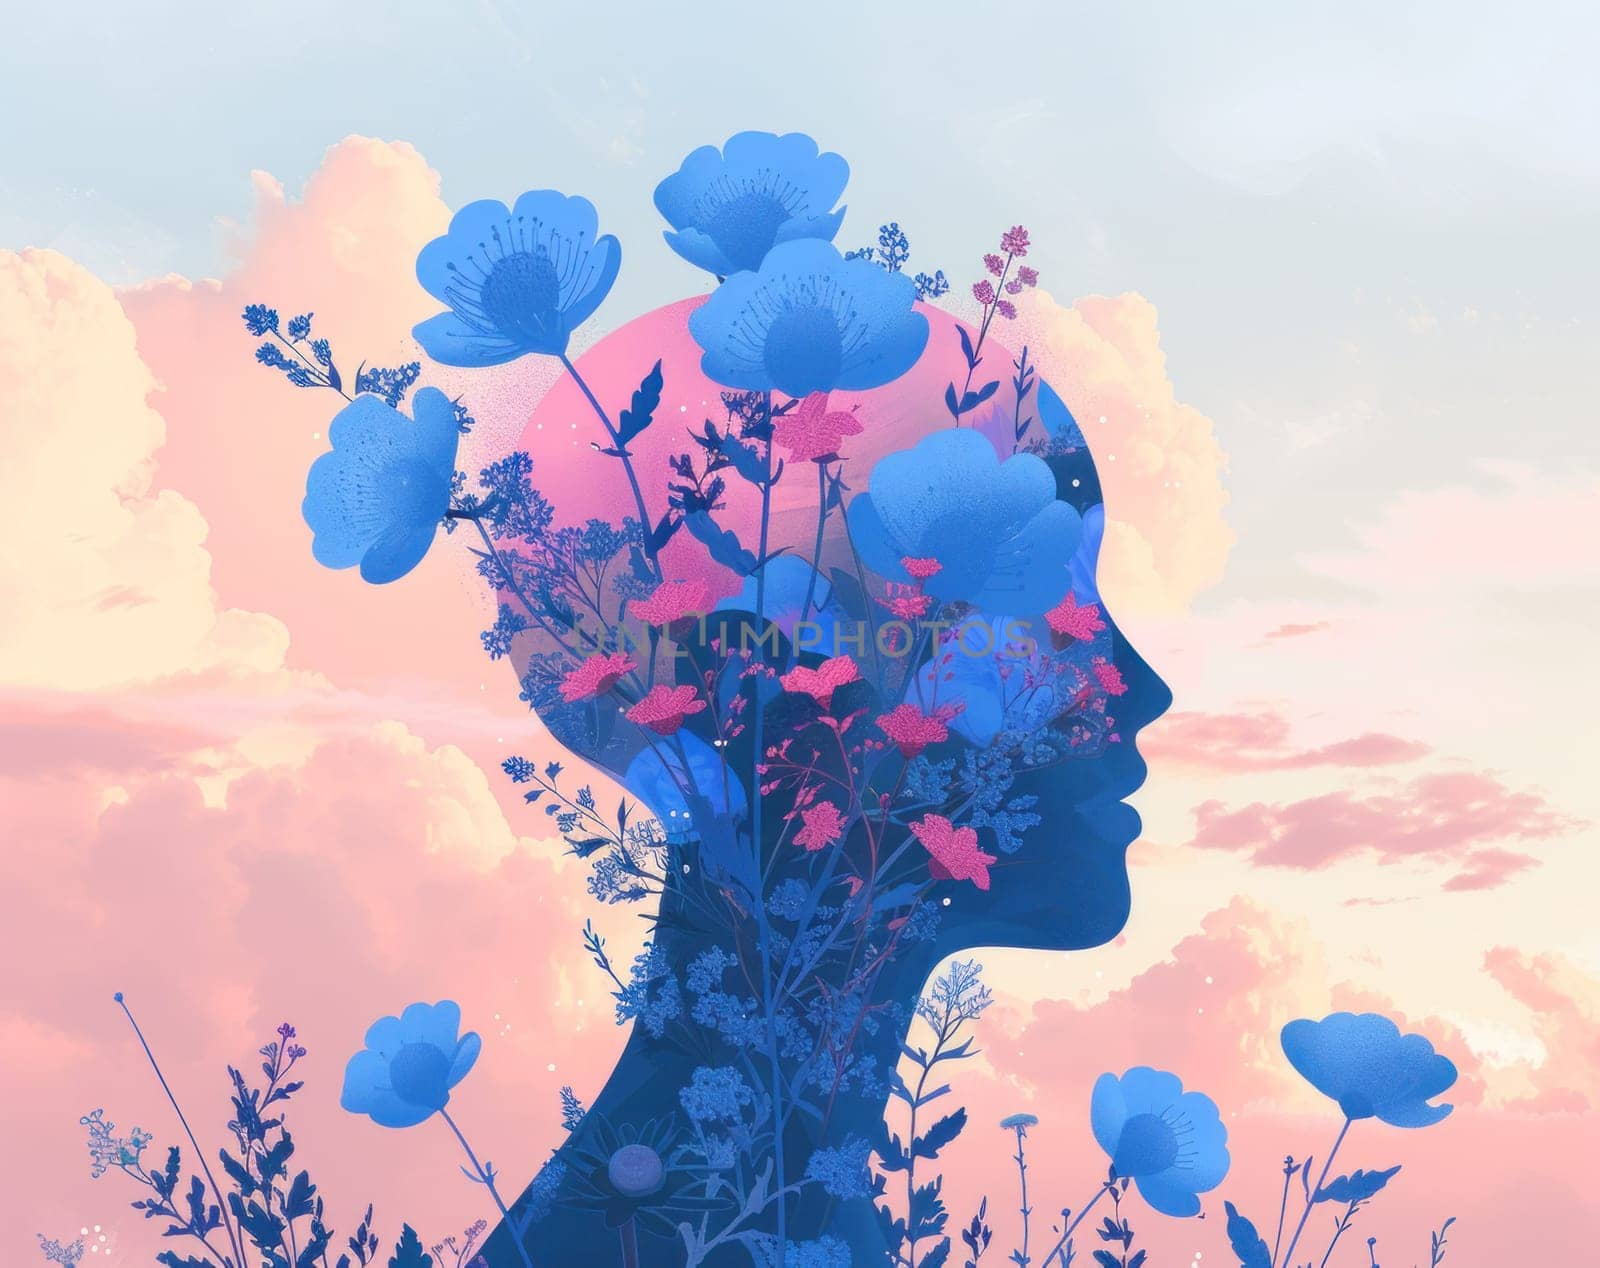 Woman with flowers in hair and clouds in background beauty and serenity in nature's embrace